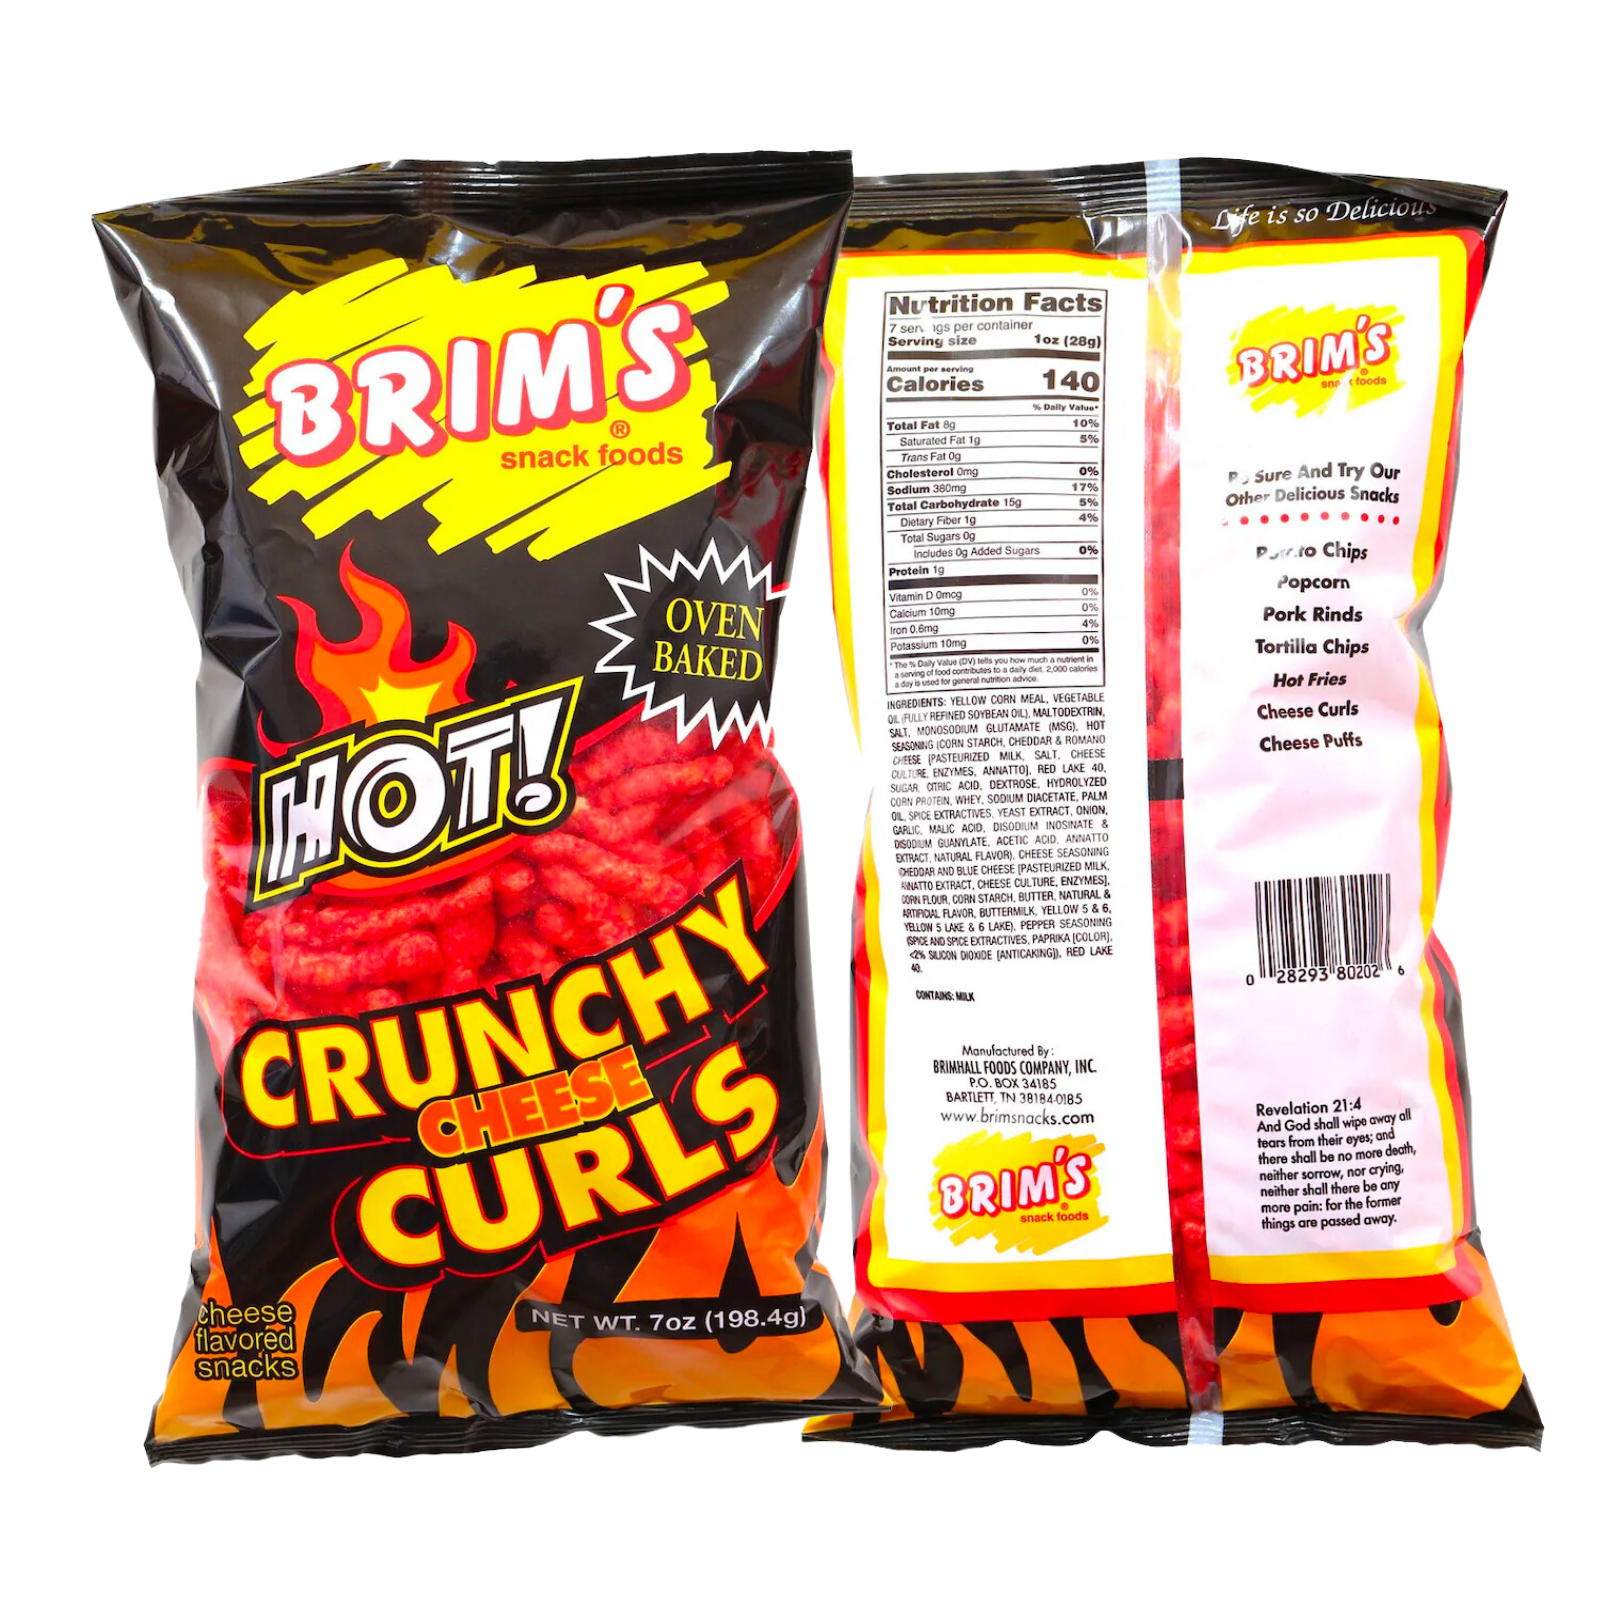 Brim's Crunchy Hot Cheese Curls (7 oz., 6-pack) - image 5 of 6